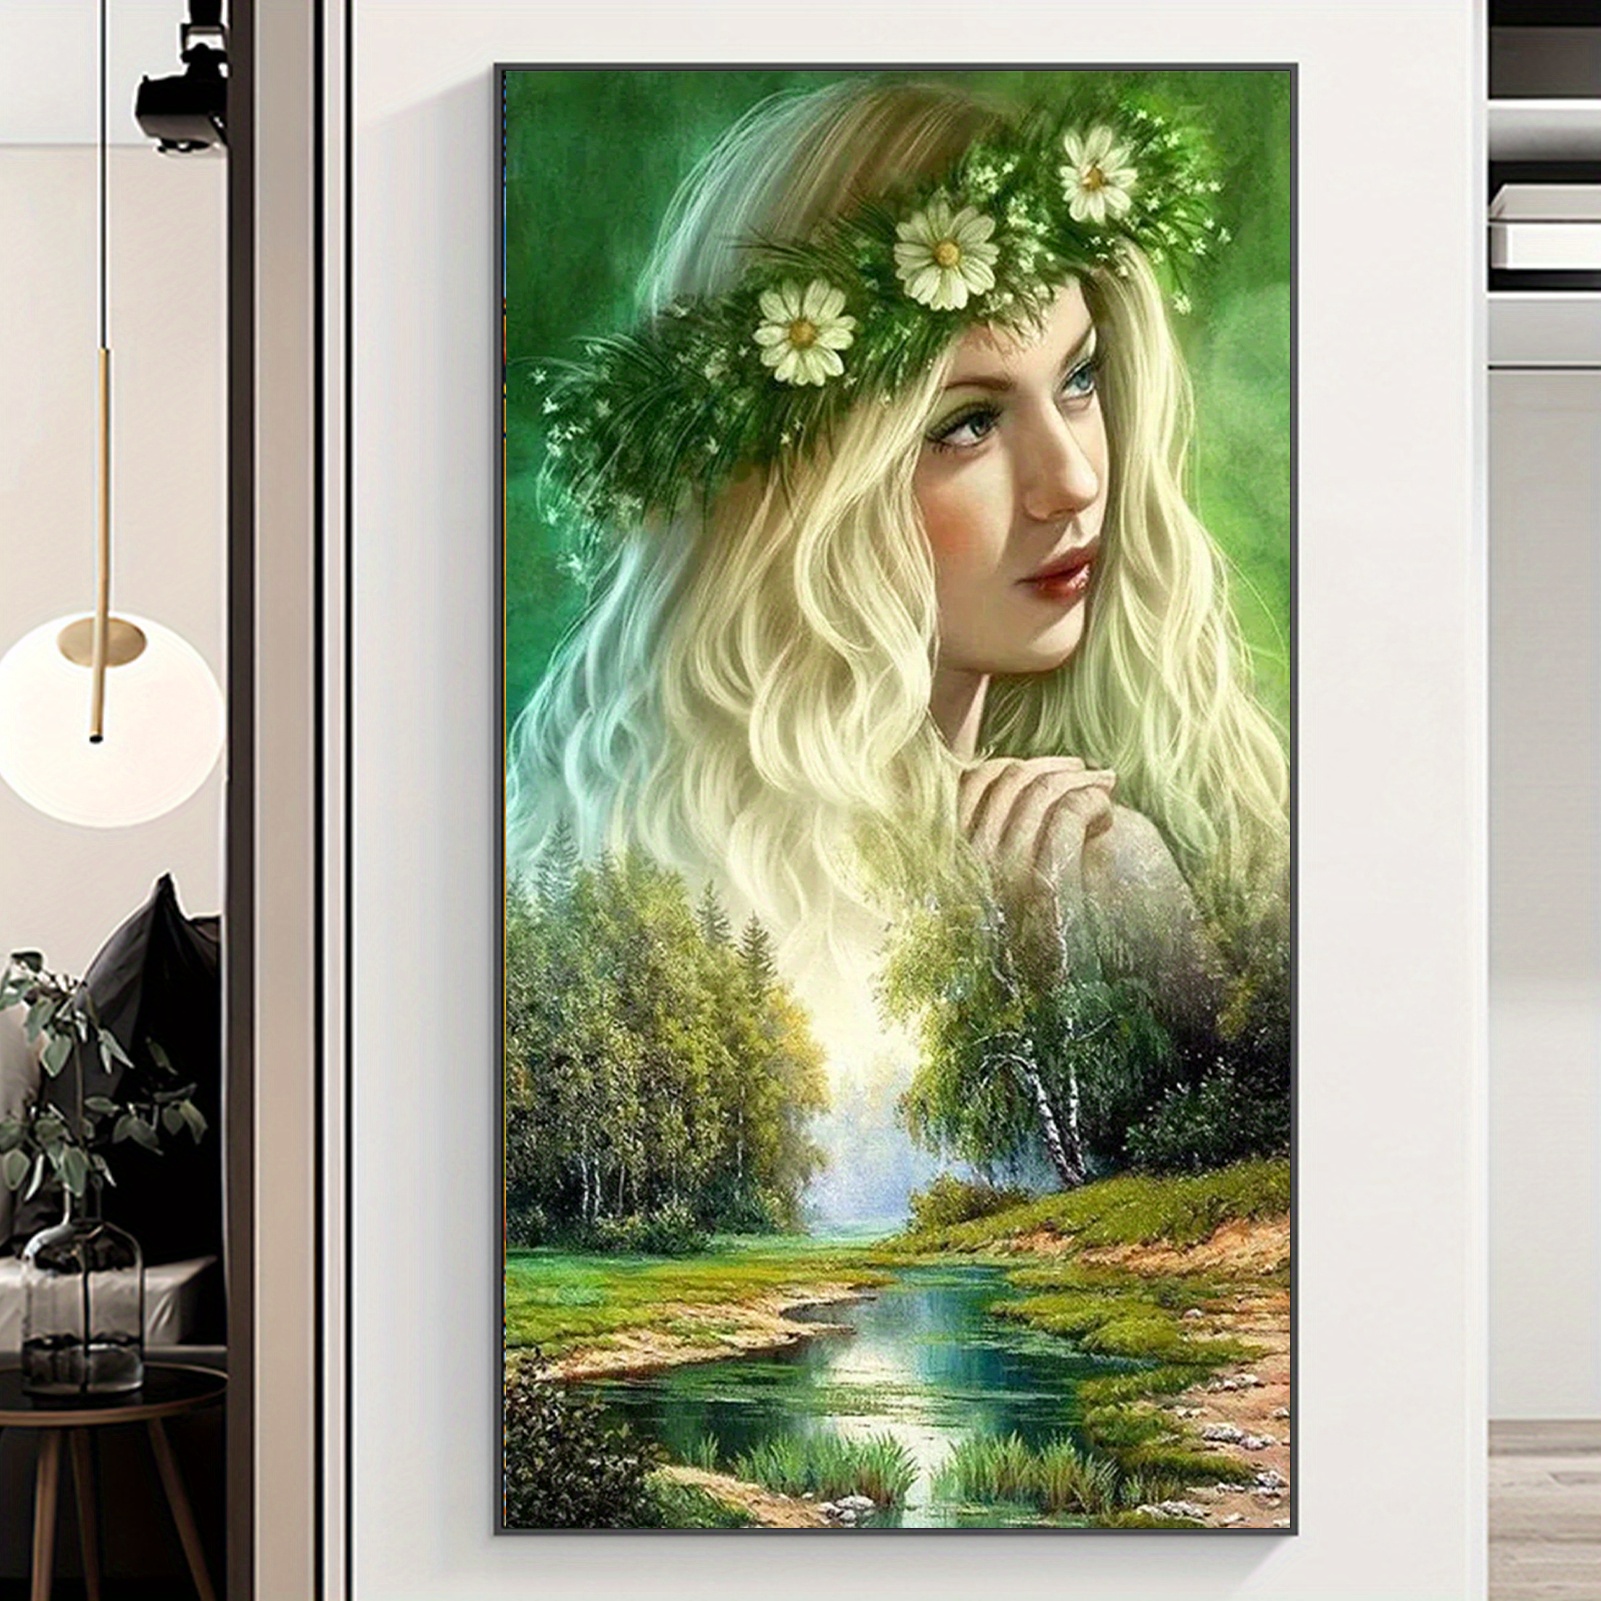 5D DIY Large Diamond Painting Kits For Adult,15.7x27.5inch/40x70cm Mountain  And River Elk Round Full Rhinestone Rhinestone Art Kits Picture By Number